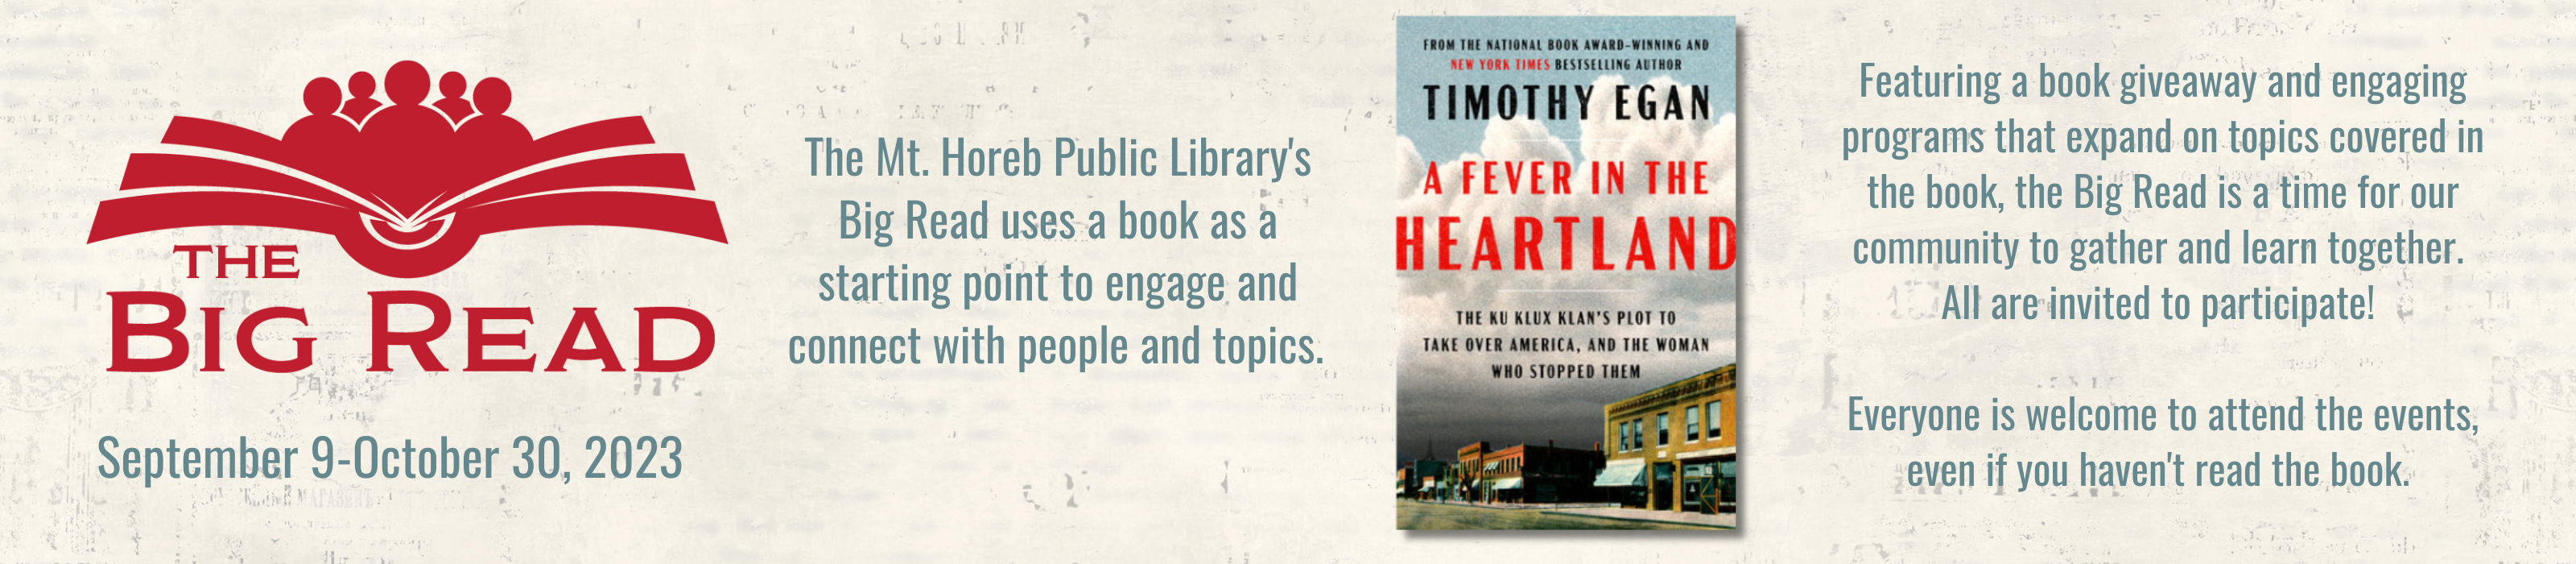 Big Read Logo and Picture of Fever in the Heartland Book Cover